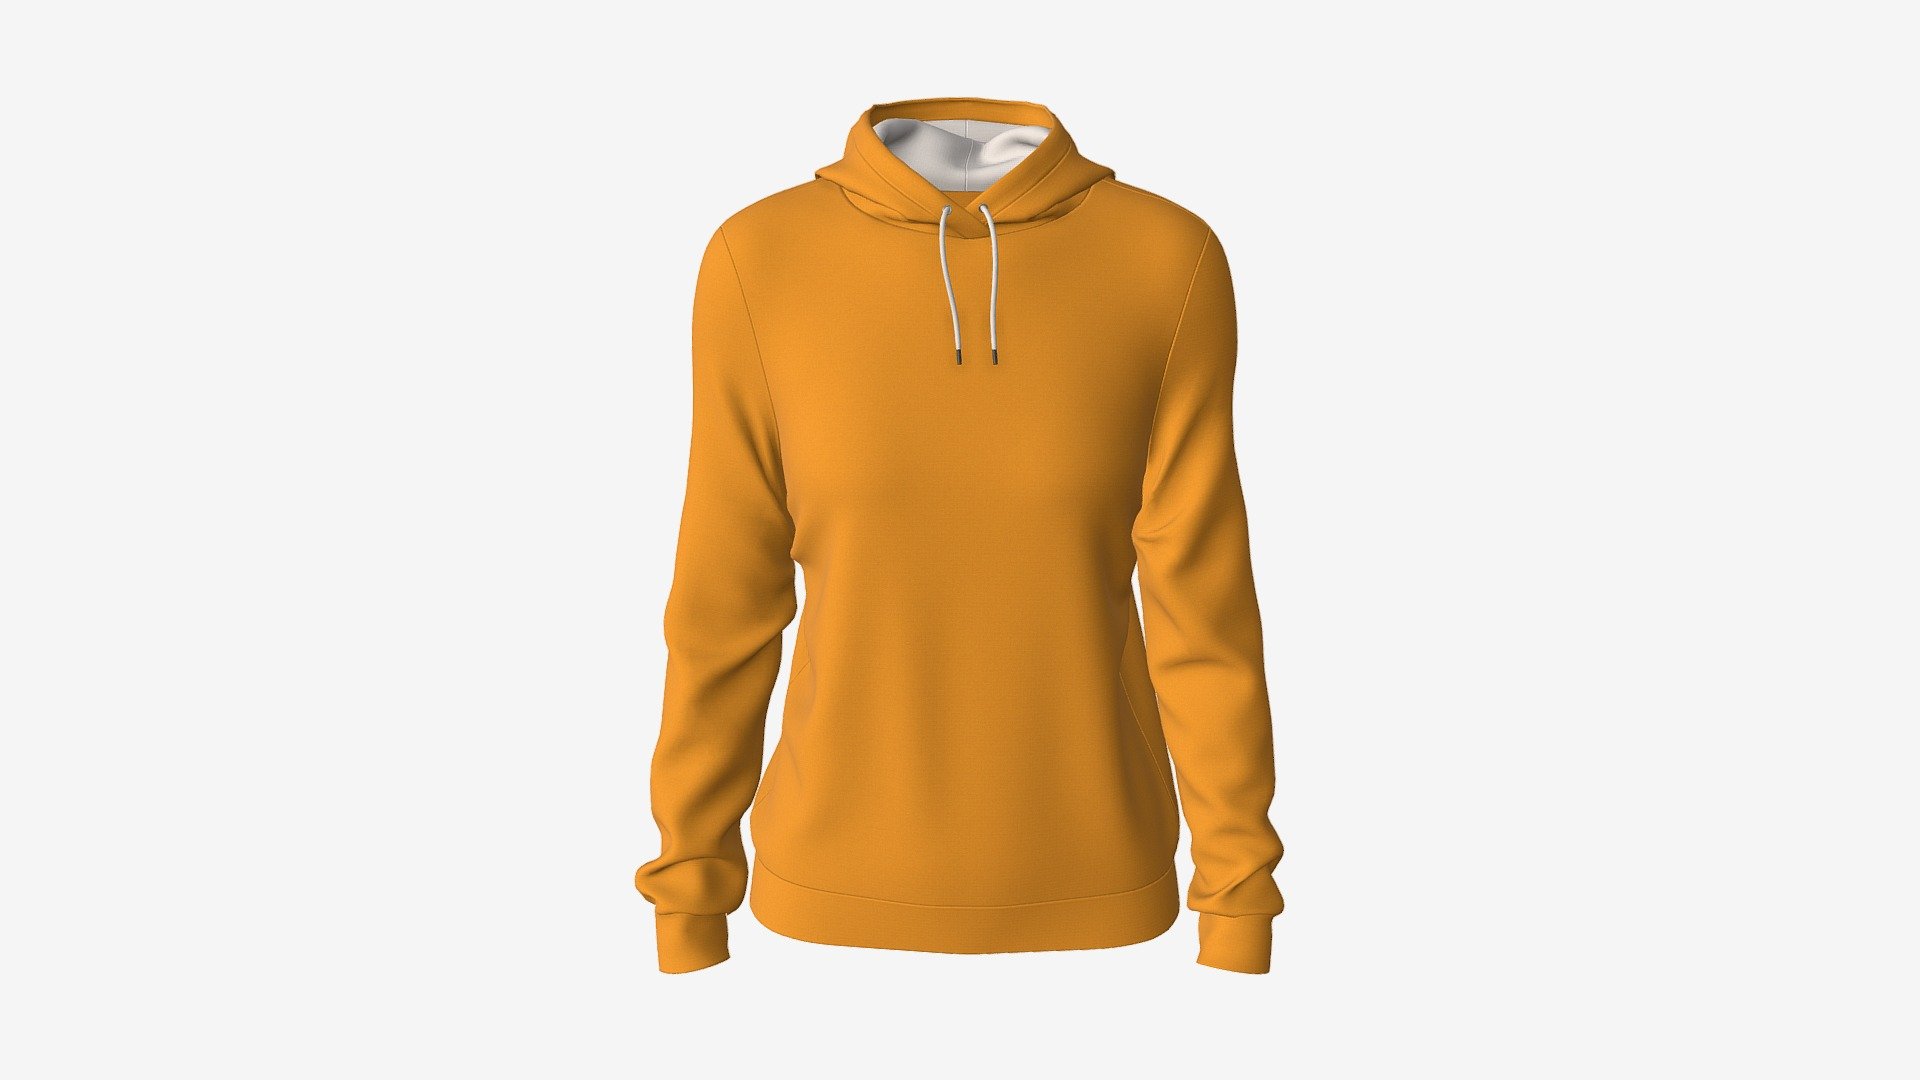 Hoodie for Women Mockup 01 Yellow - Buy Royalty Free 3D model by ...